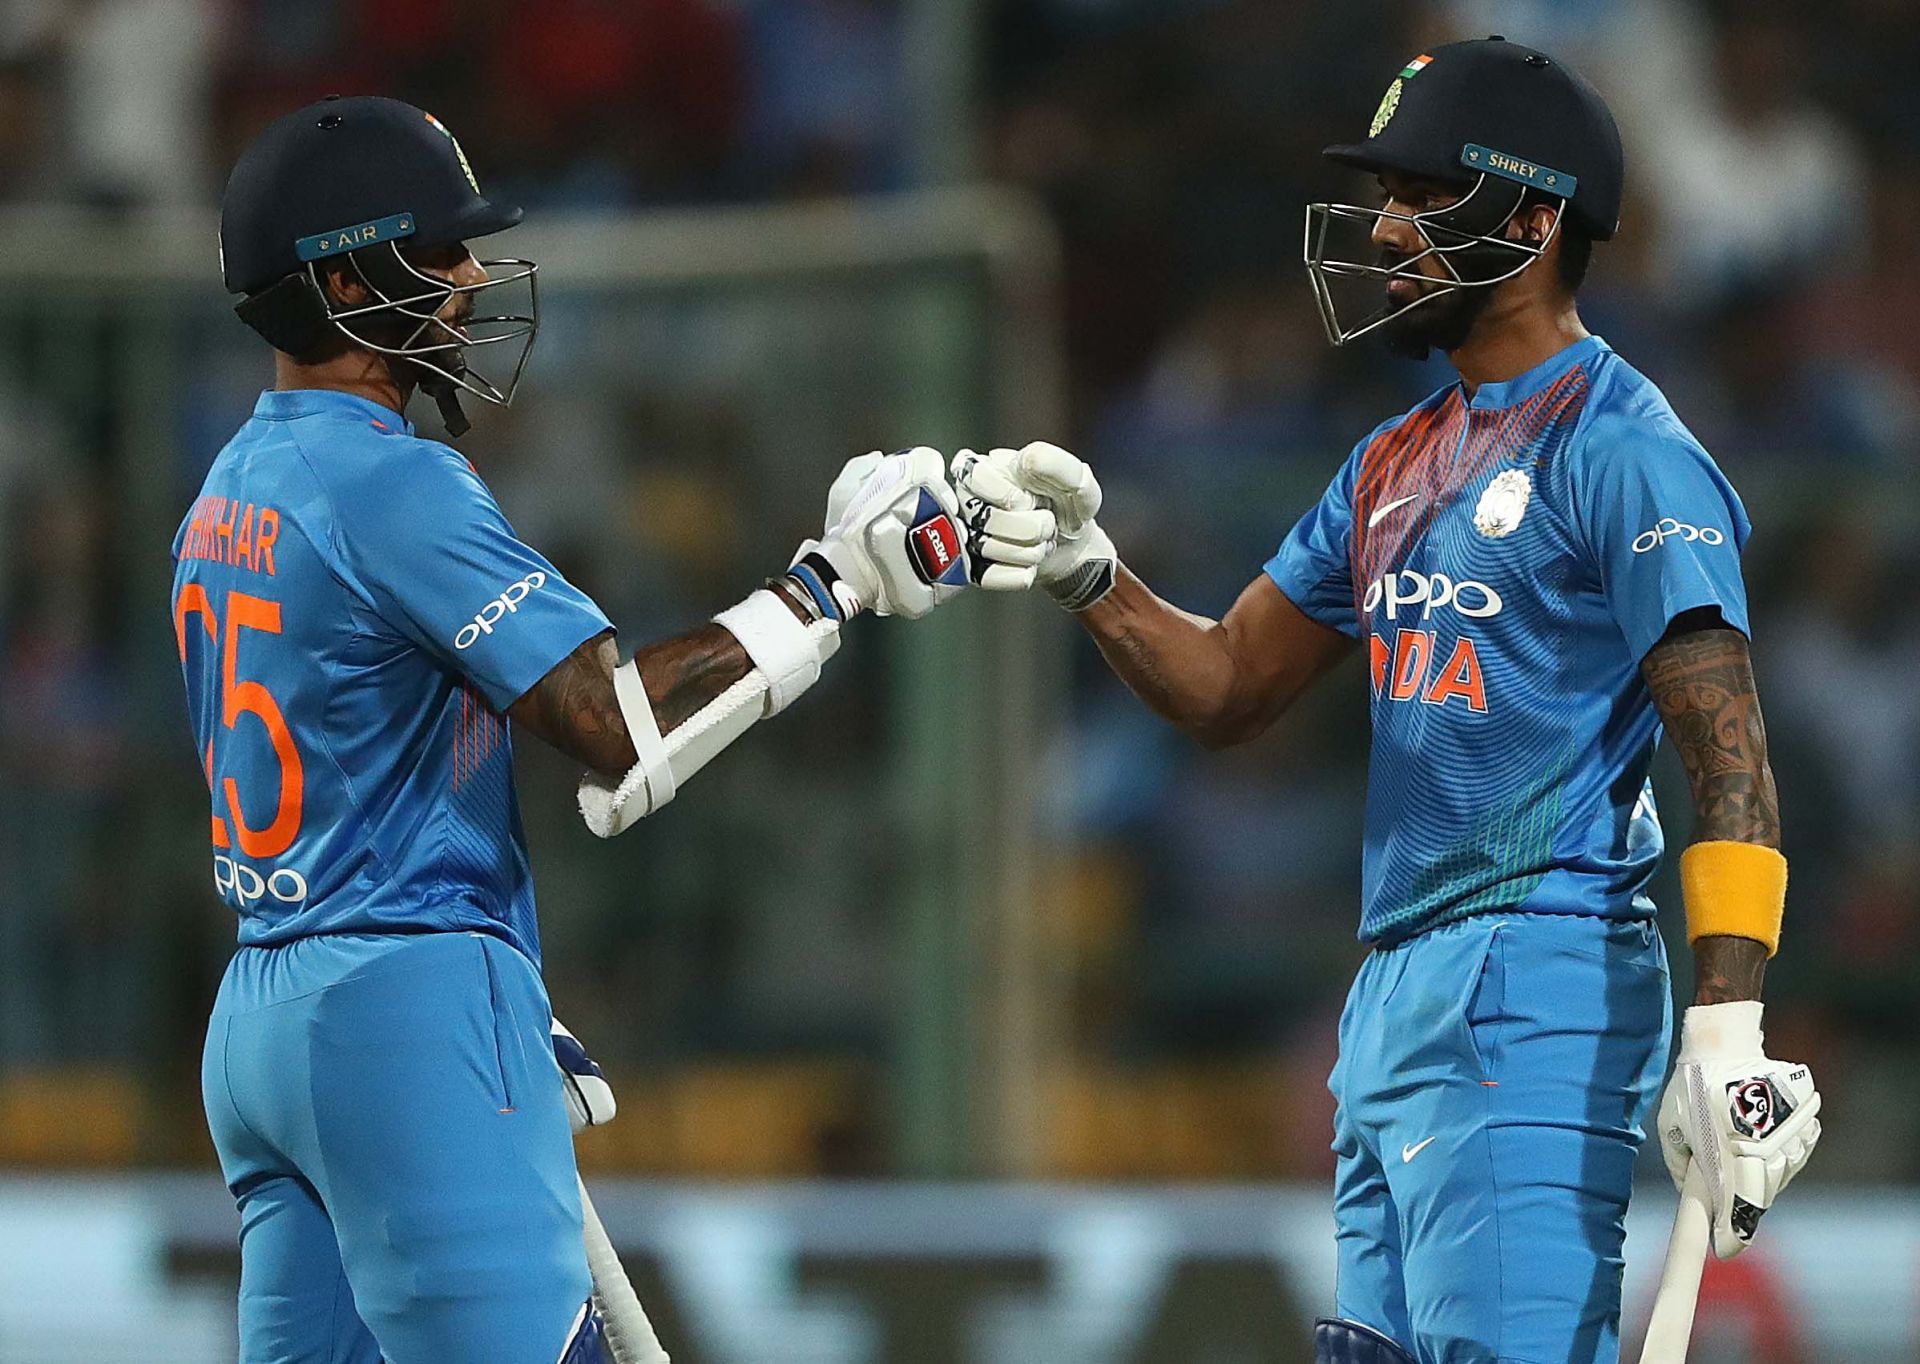 Shikhar Dhawan and KL Rahul will be key batters for India against Zimbabwe (Image courtesy: Getty Images)